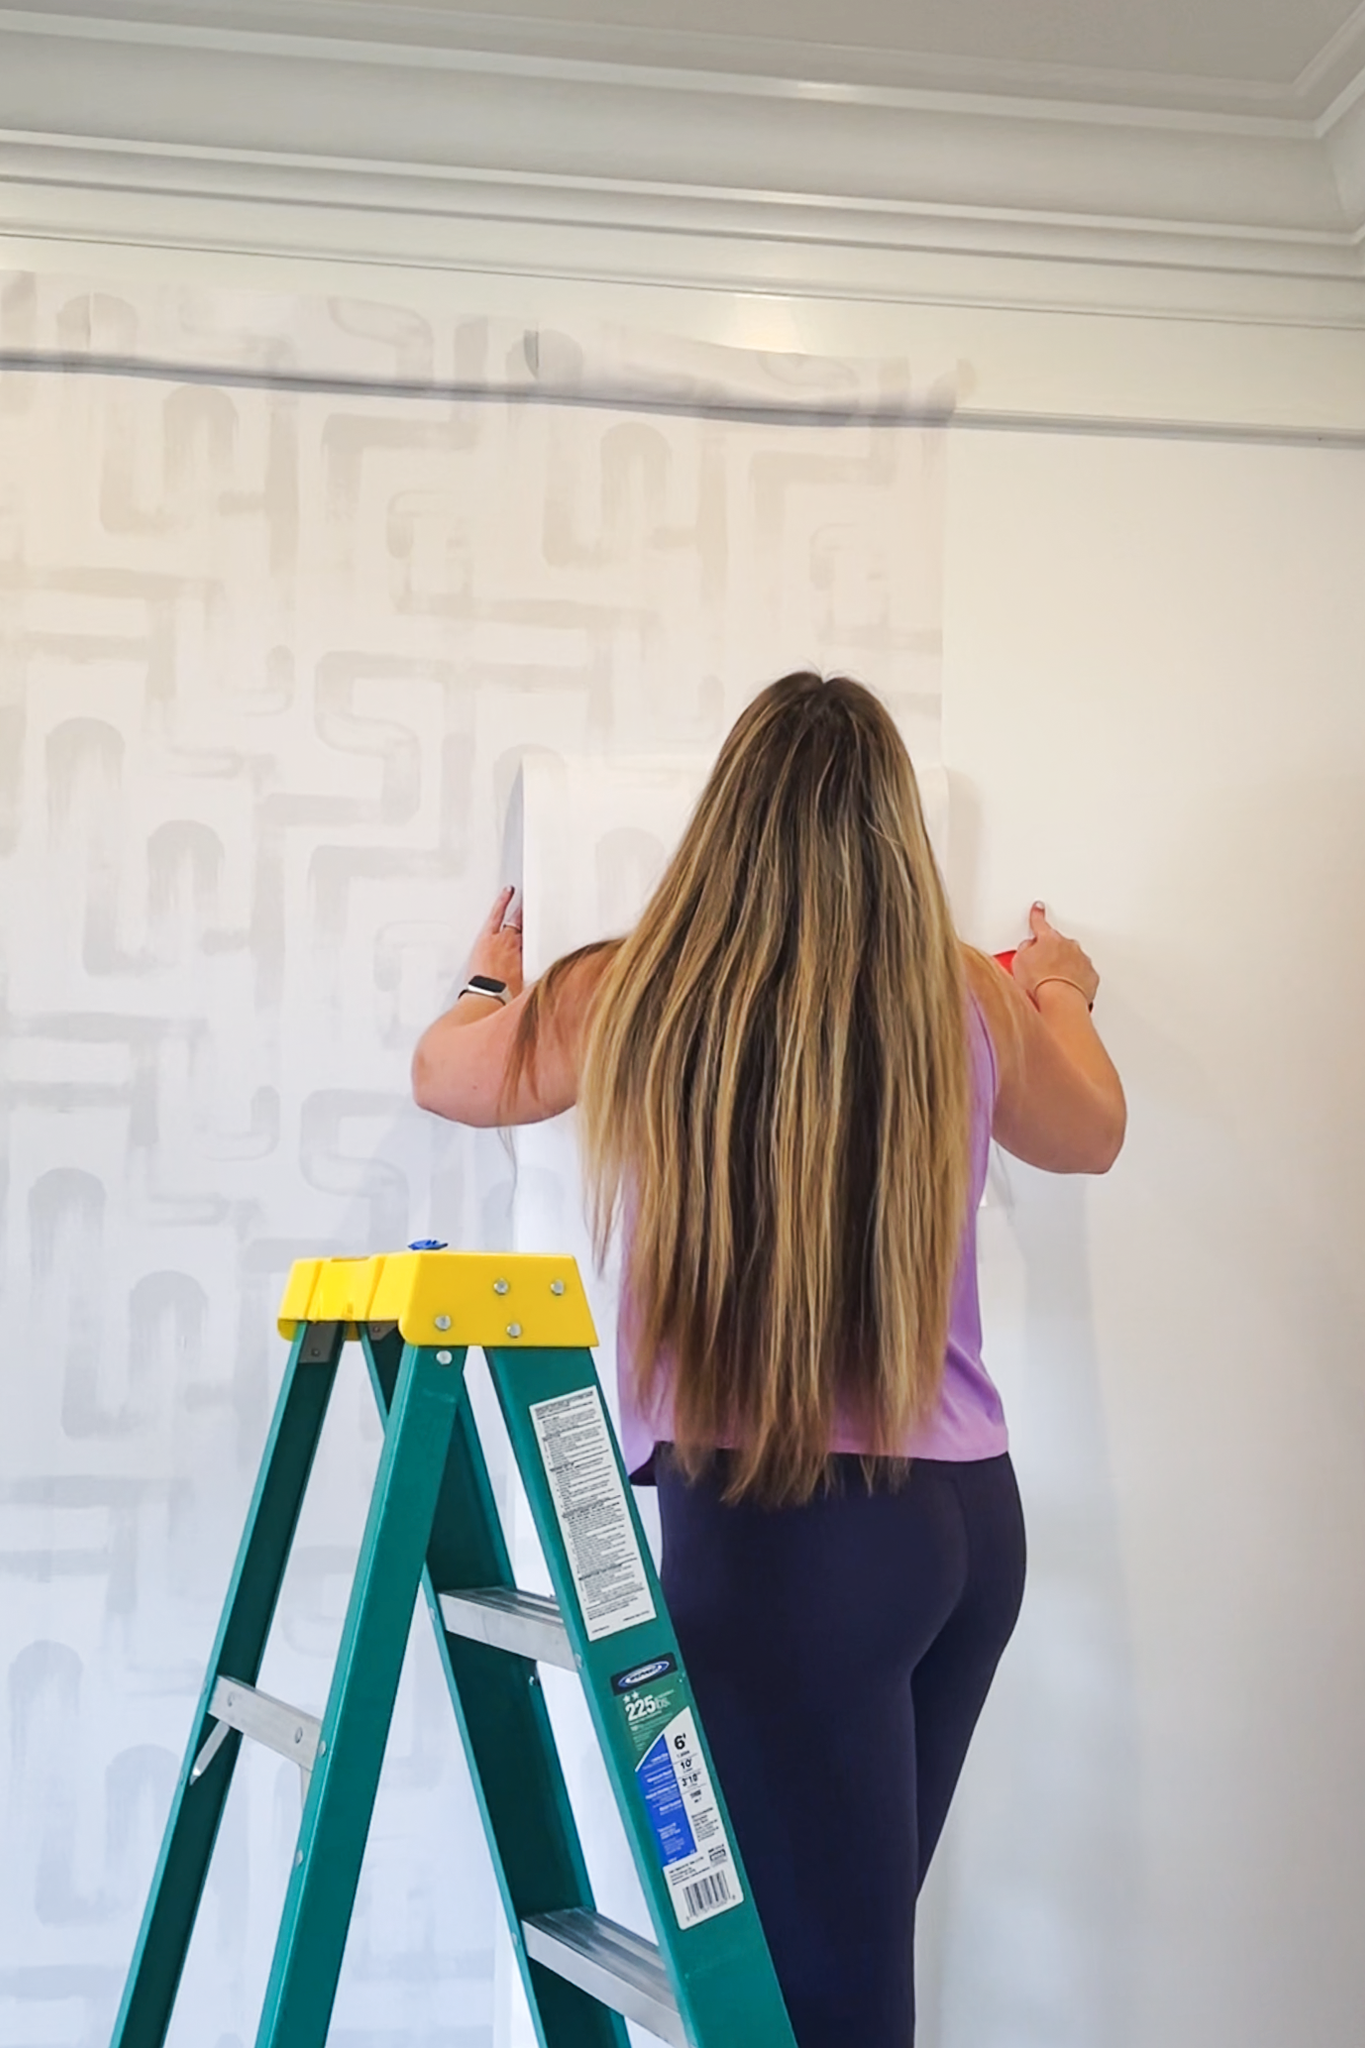 Self-Adhesive Wallpaper Vs Traditional: Which is Right for You?